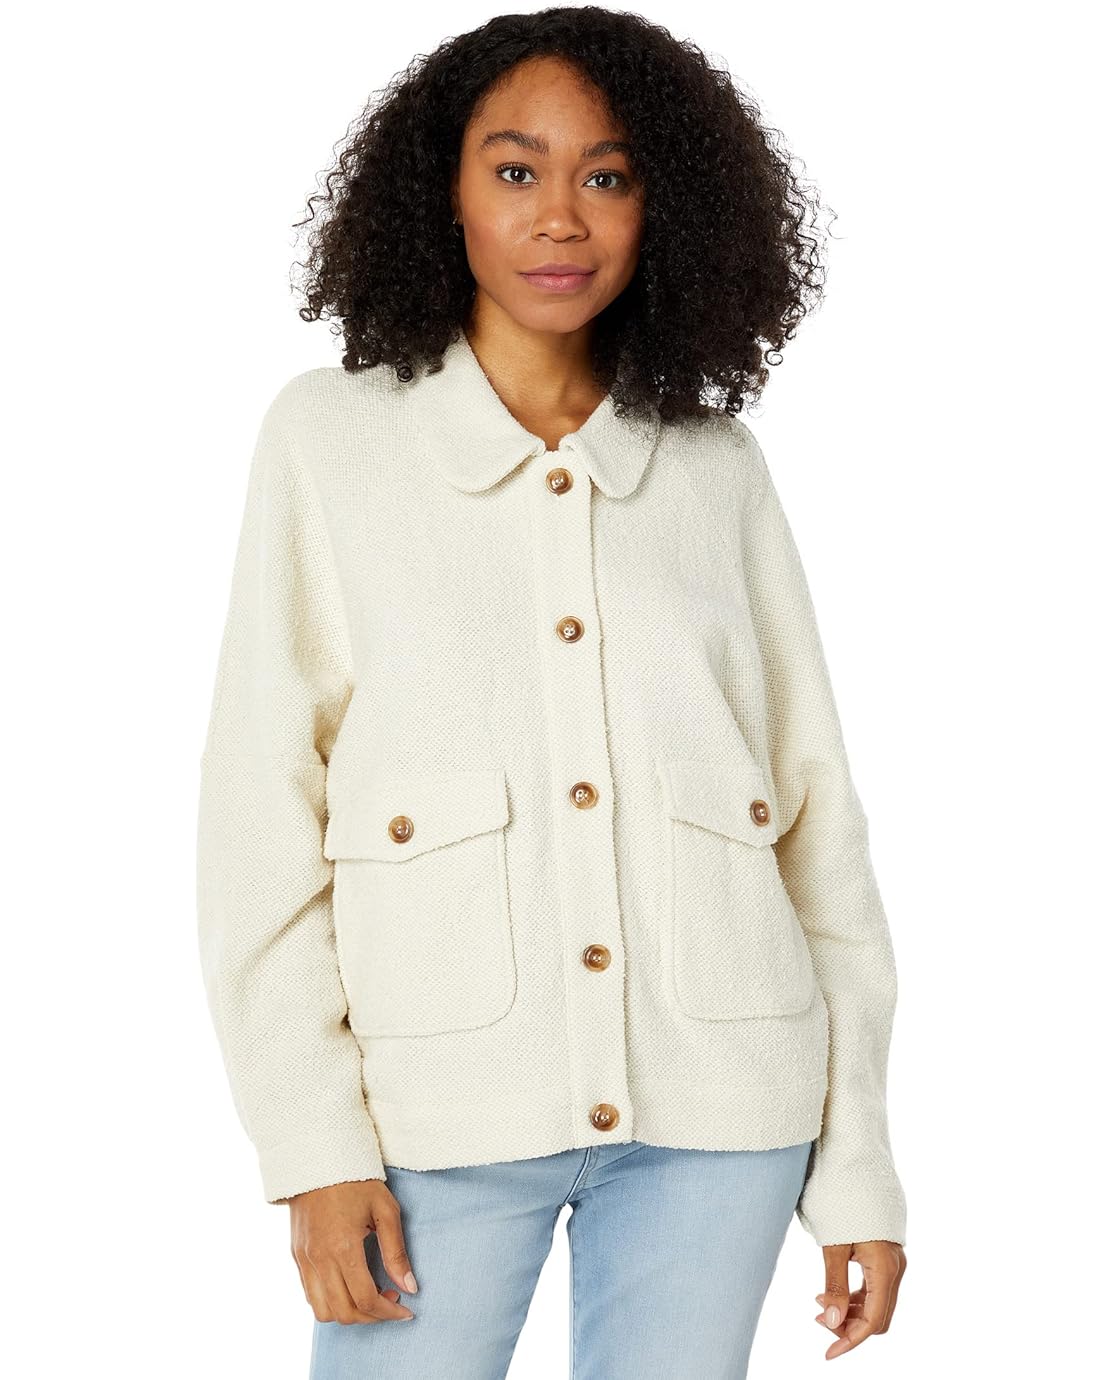 Saltwater Luxe Asher Long Sleeve Jacket